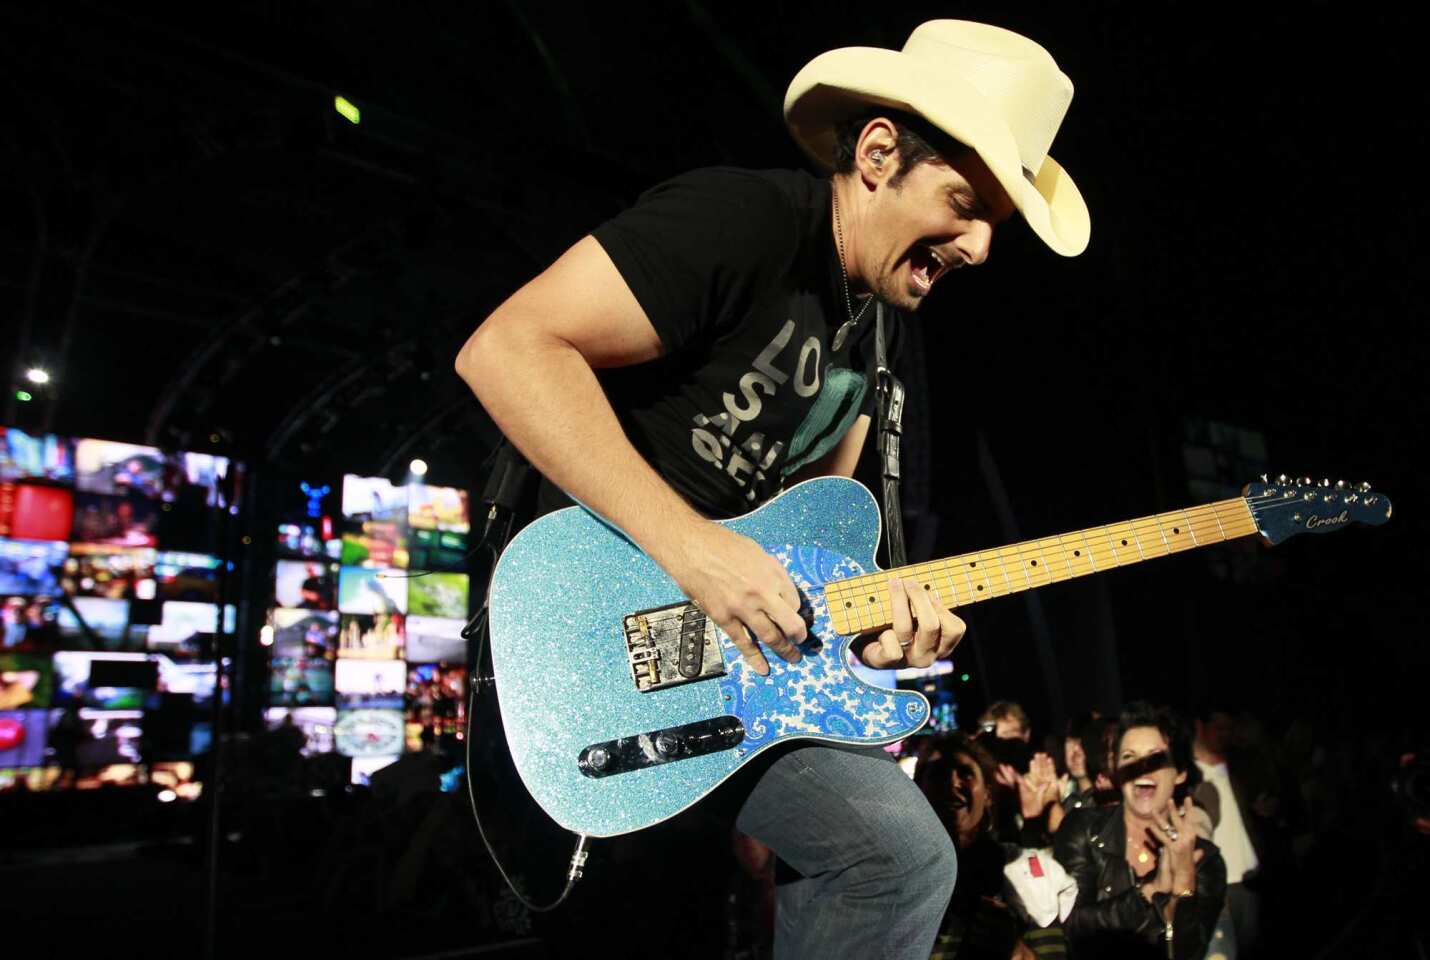 Brad Paisley gets into a number during his performance at the Hollywood Bowl on Saturday.